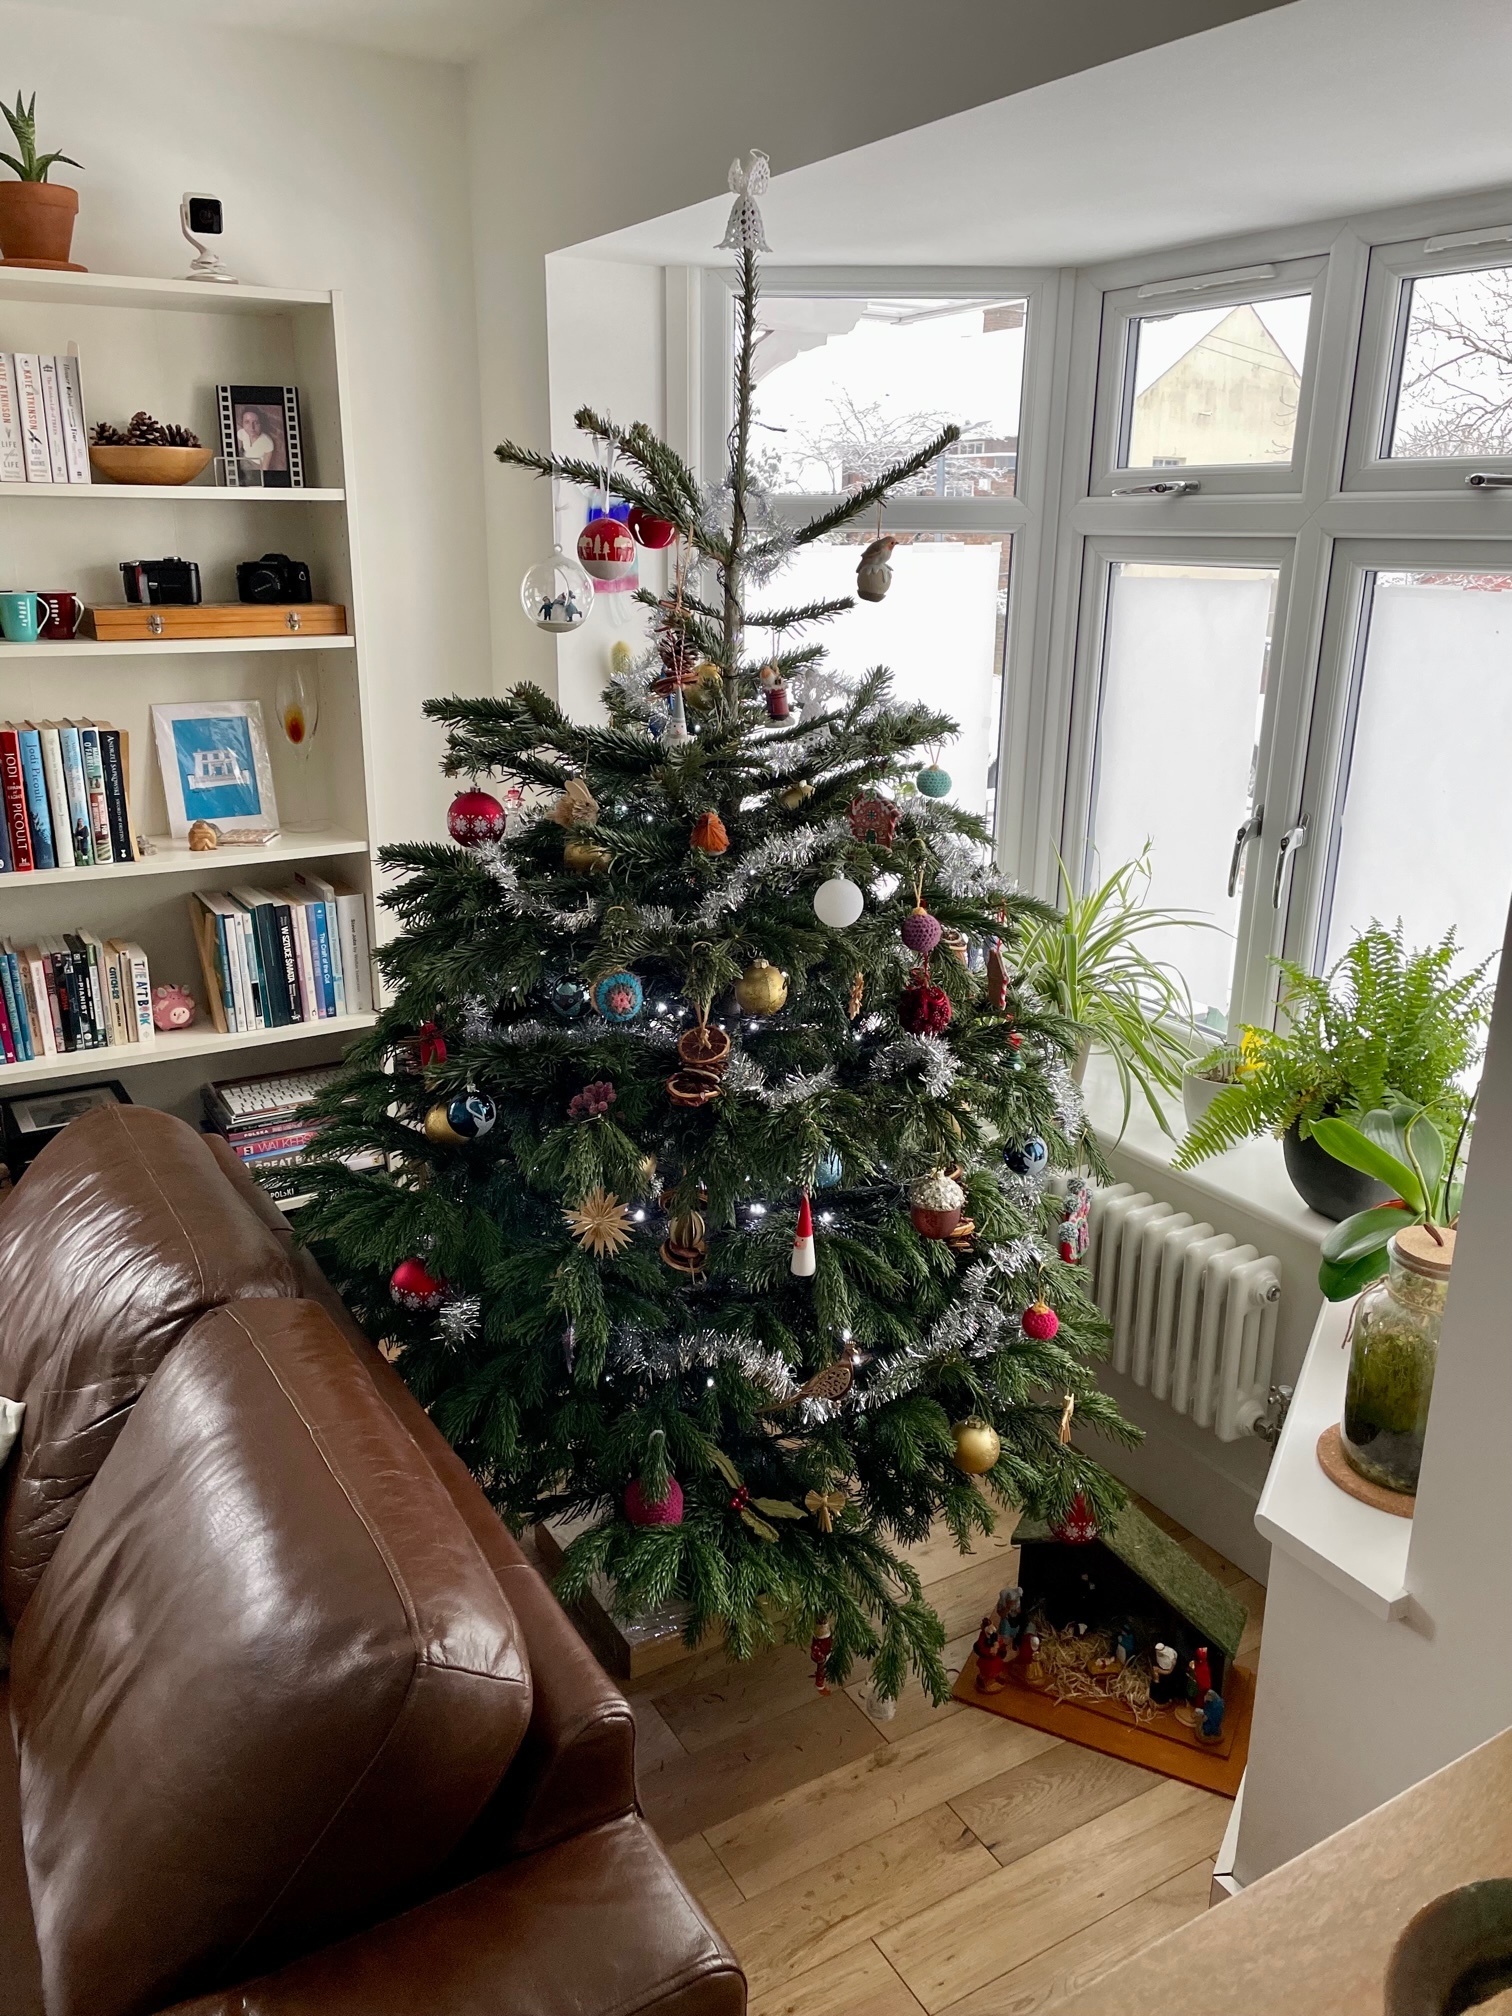 Basic photo of a Christmas tree in the living room